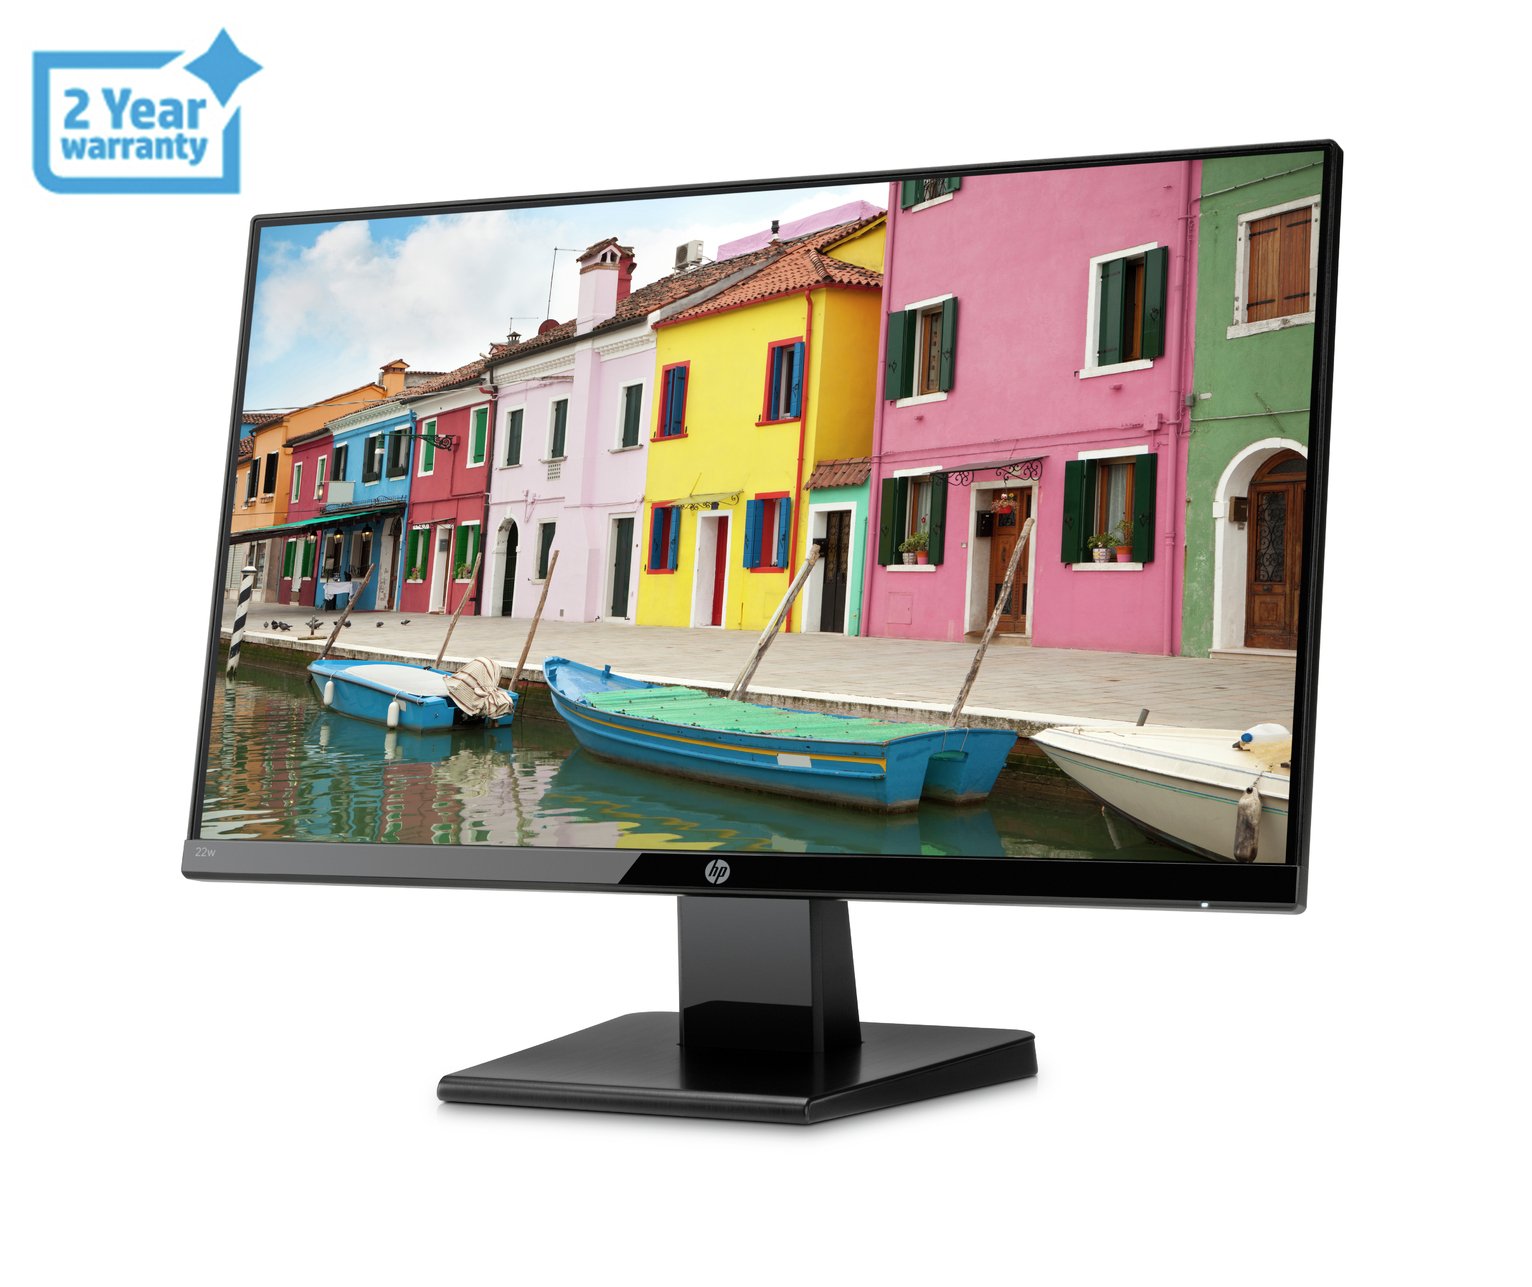 HP 22w 21.5 Inch FHD IPS Monitor Review